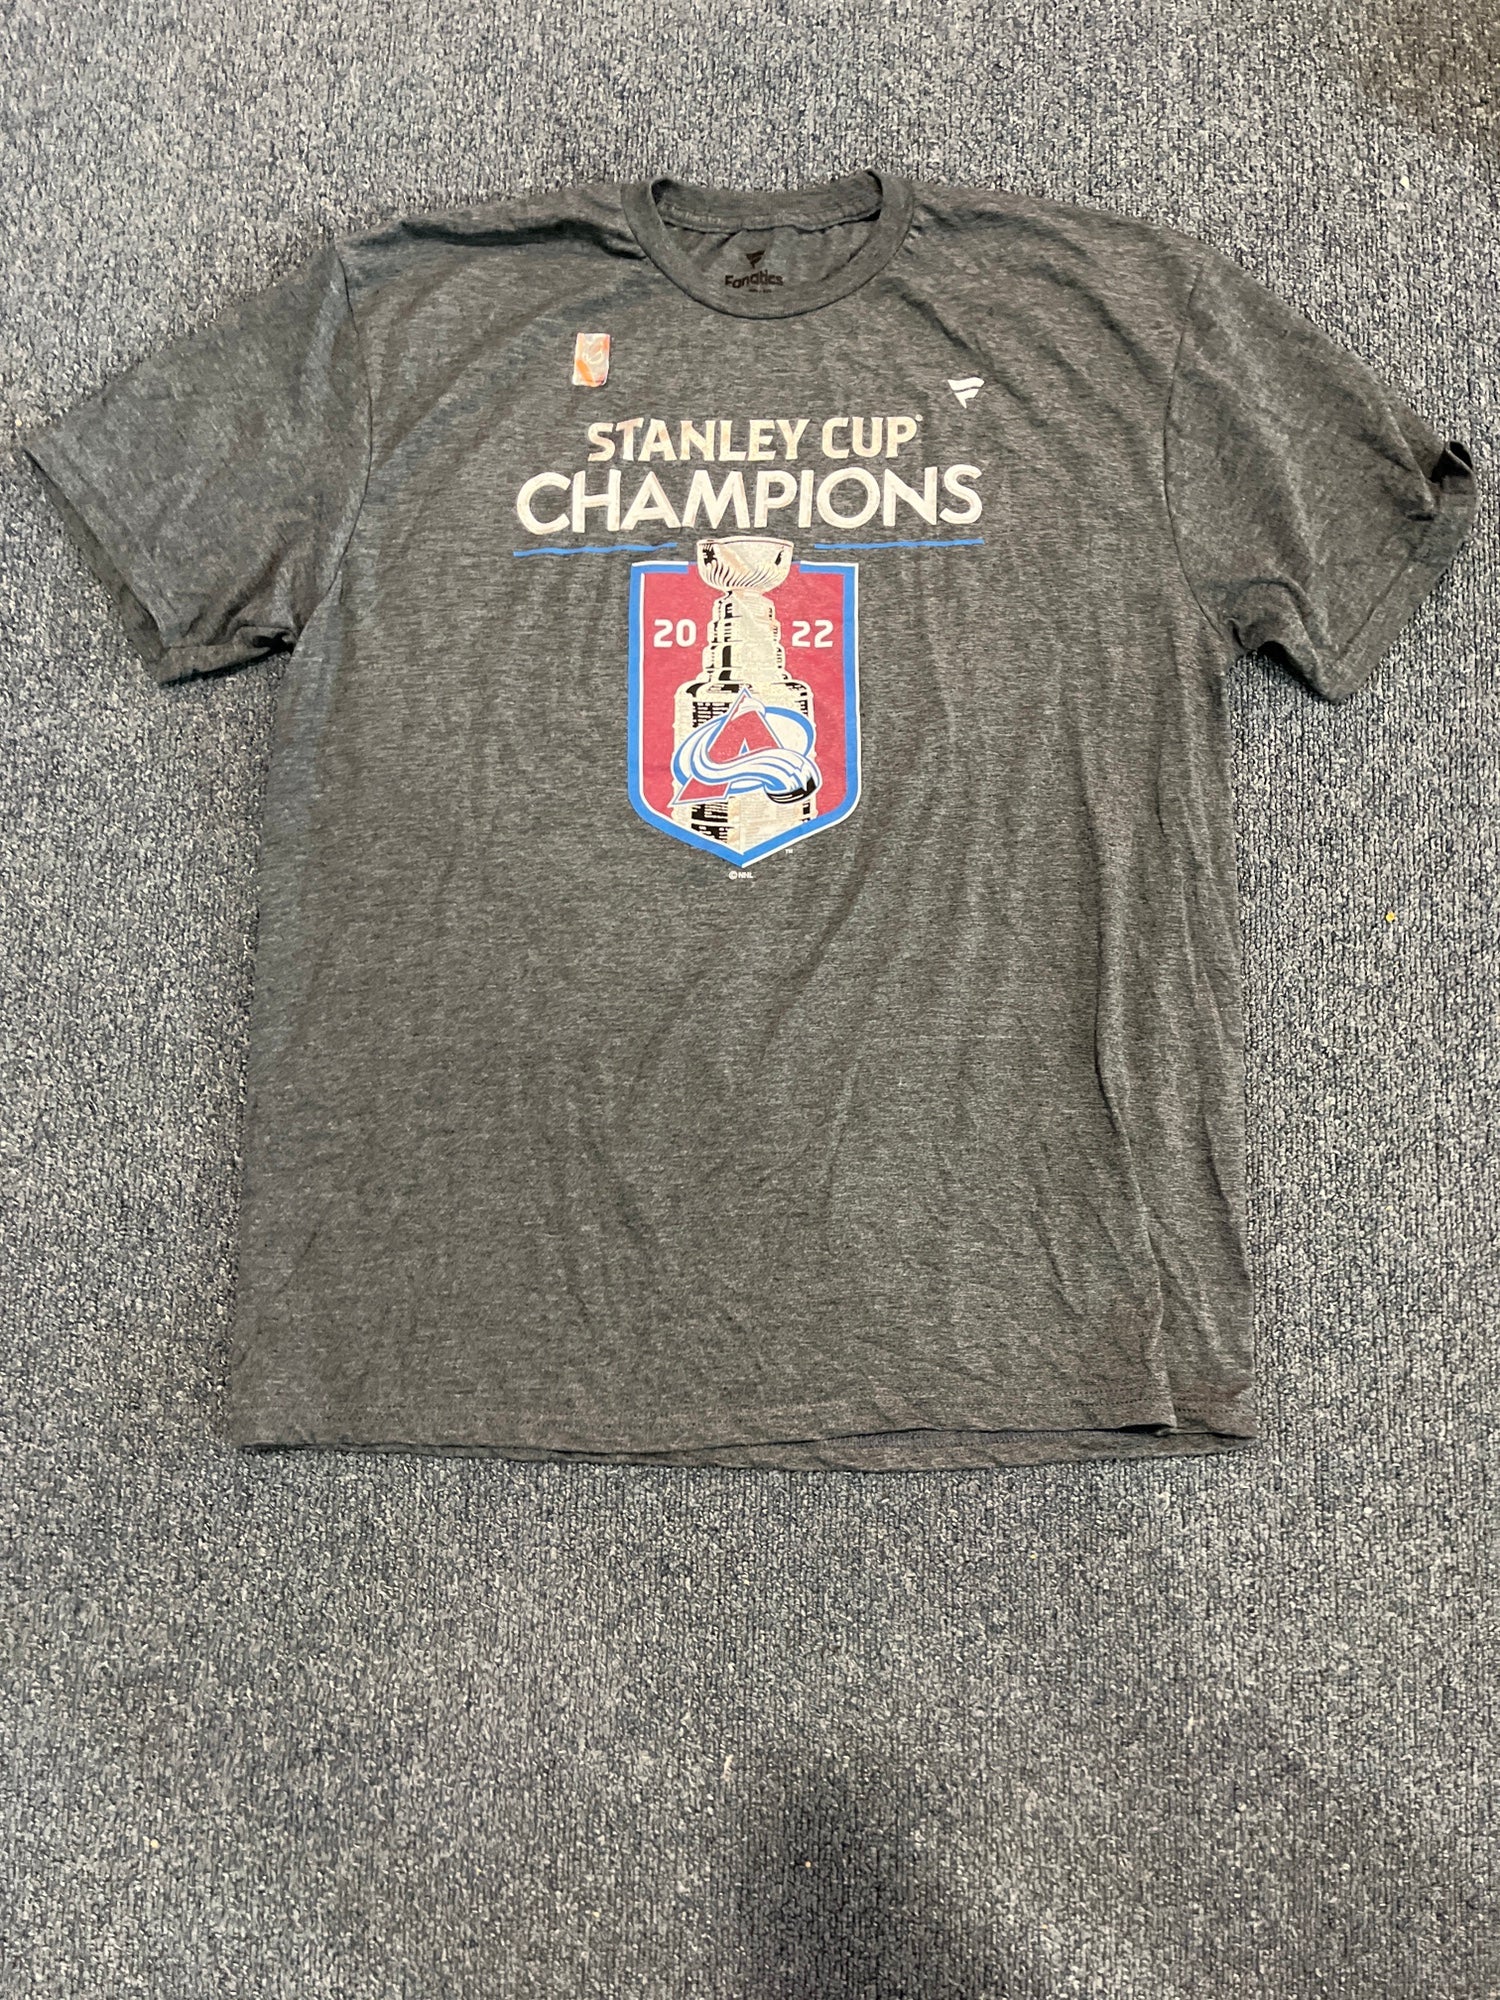 New York Mets 2015 NL Champions Adult Extra Large T-Shirt